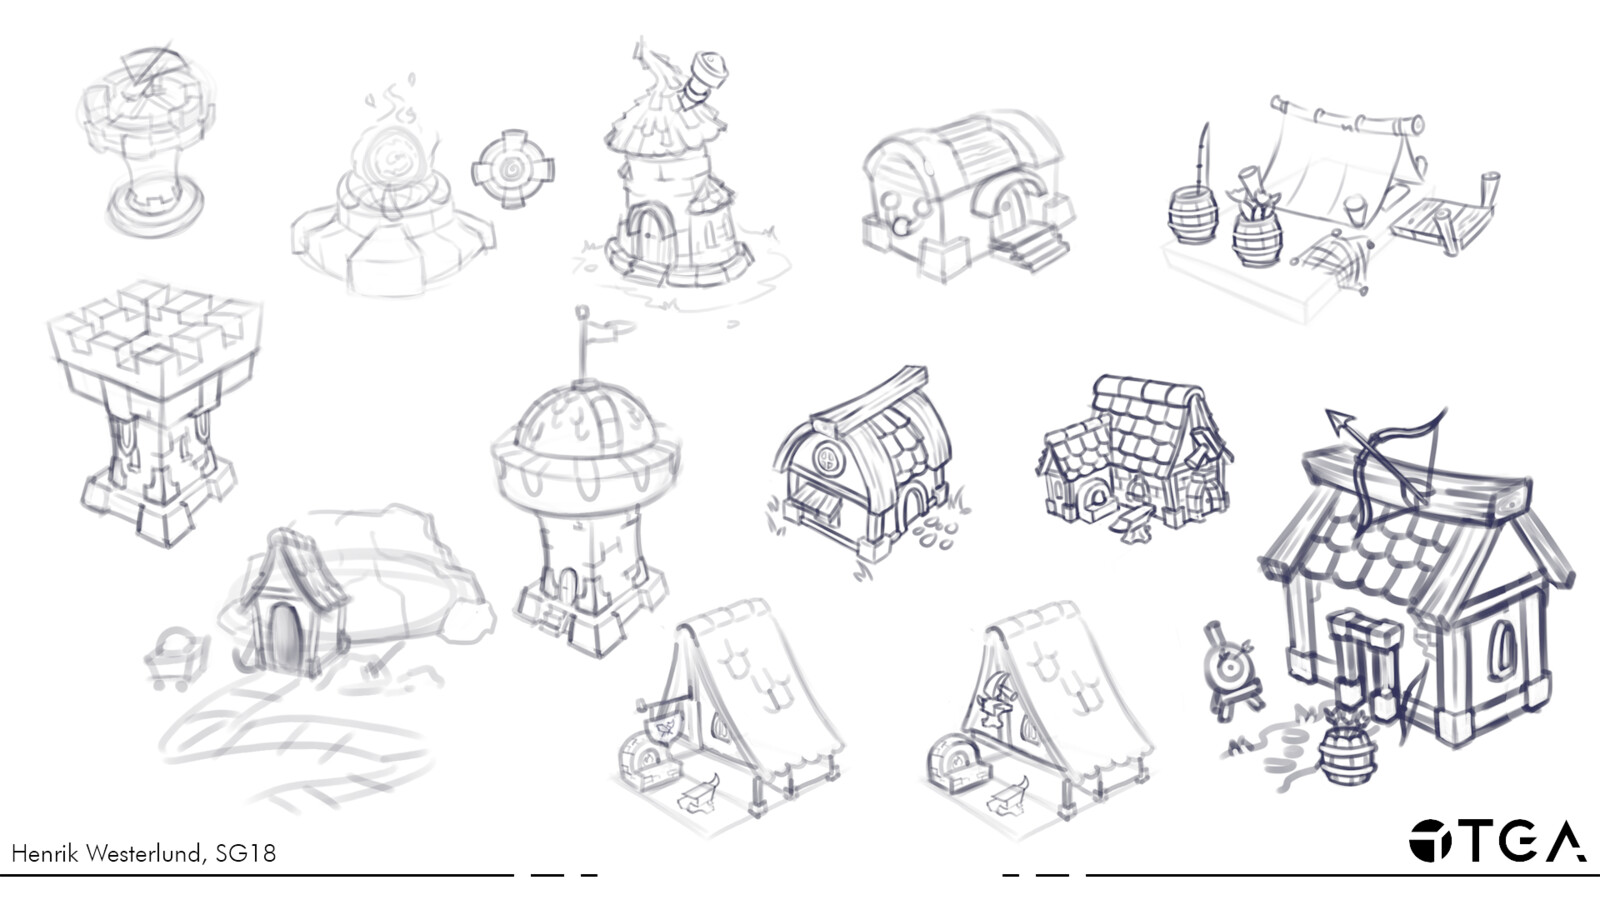 Some early concept sketches, many of which were scrapped while others were further developed during the modeling phase.